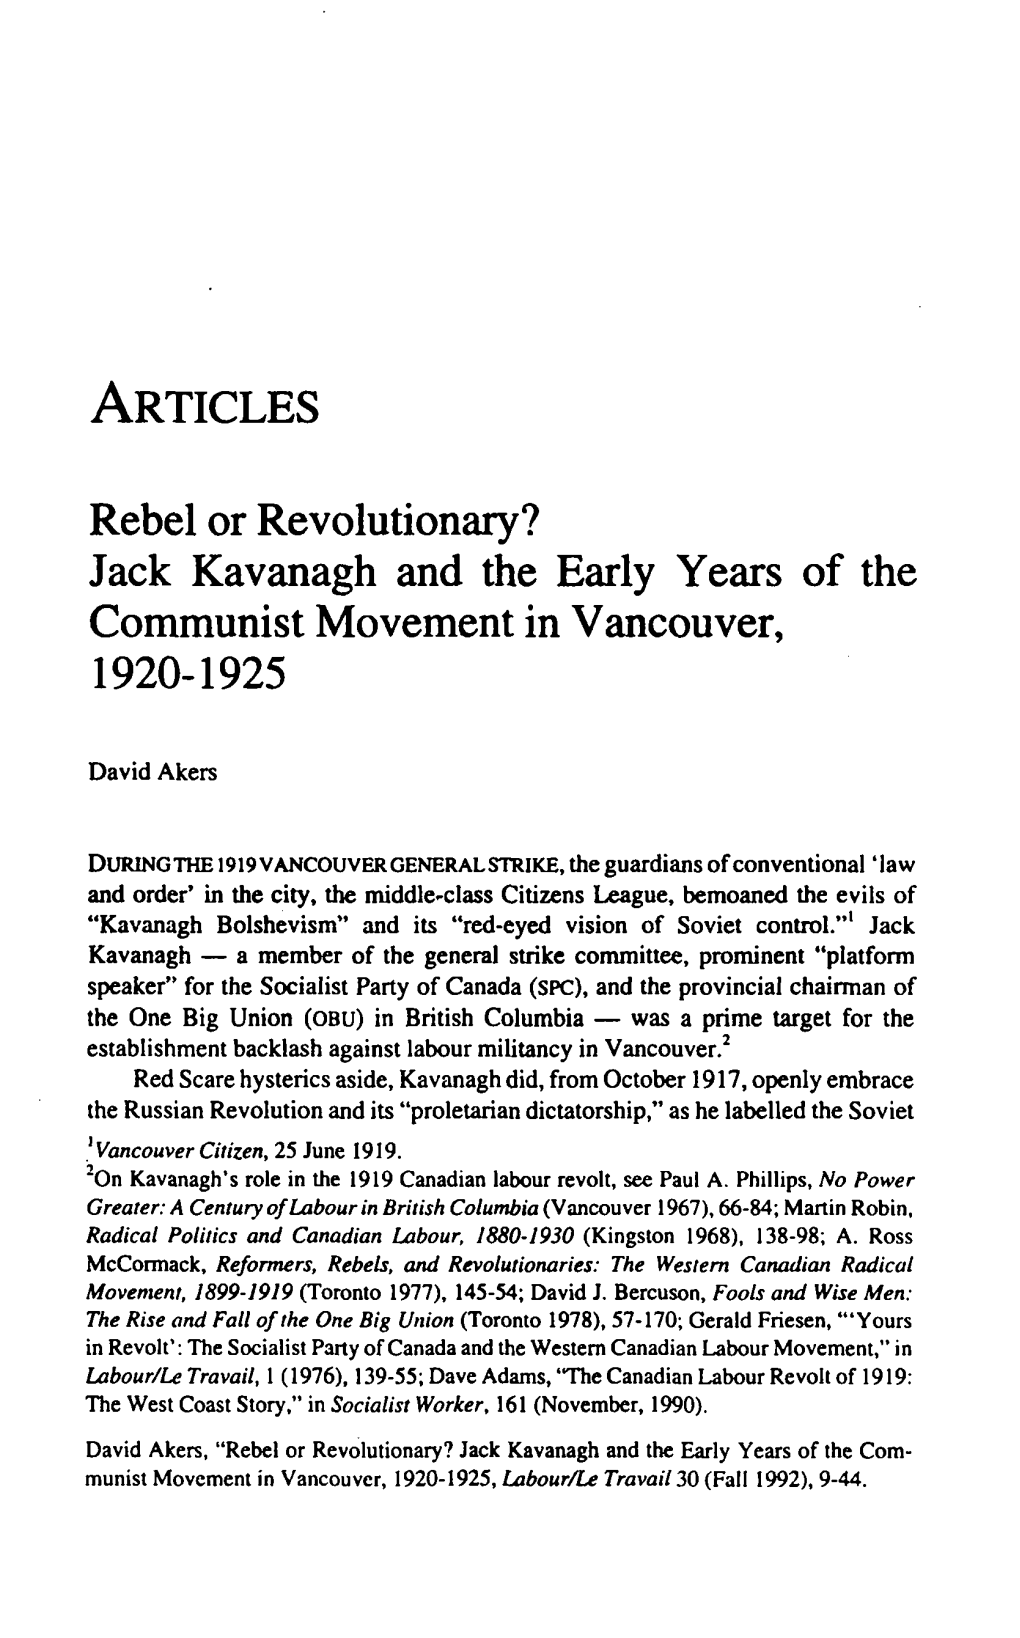 ARTICLES Rebel Or Revolutionary? Jack Kavanagh and the Early Years of the Communist Movement in Vancouver, 1920-1925